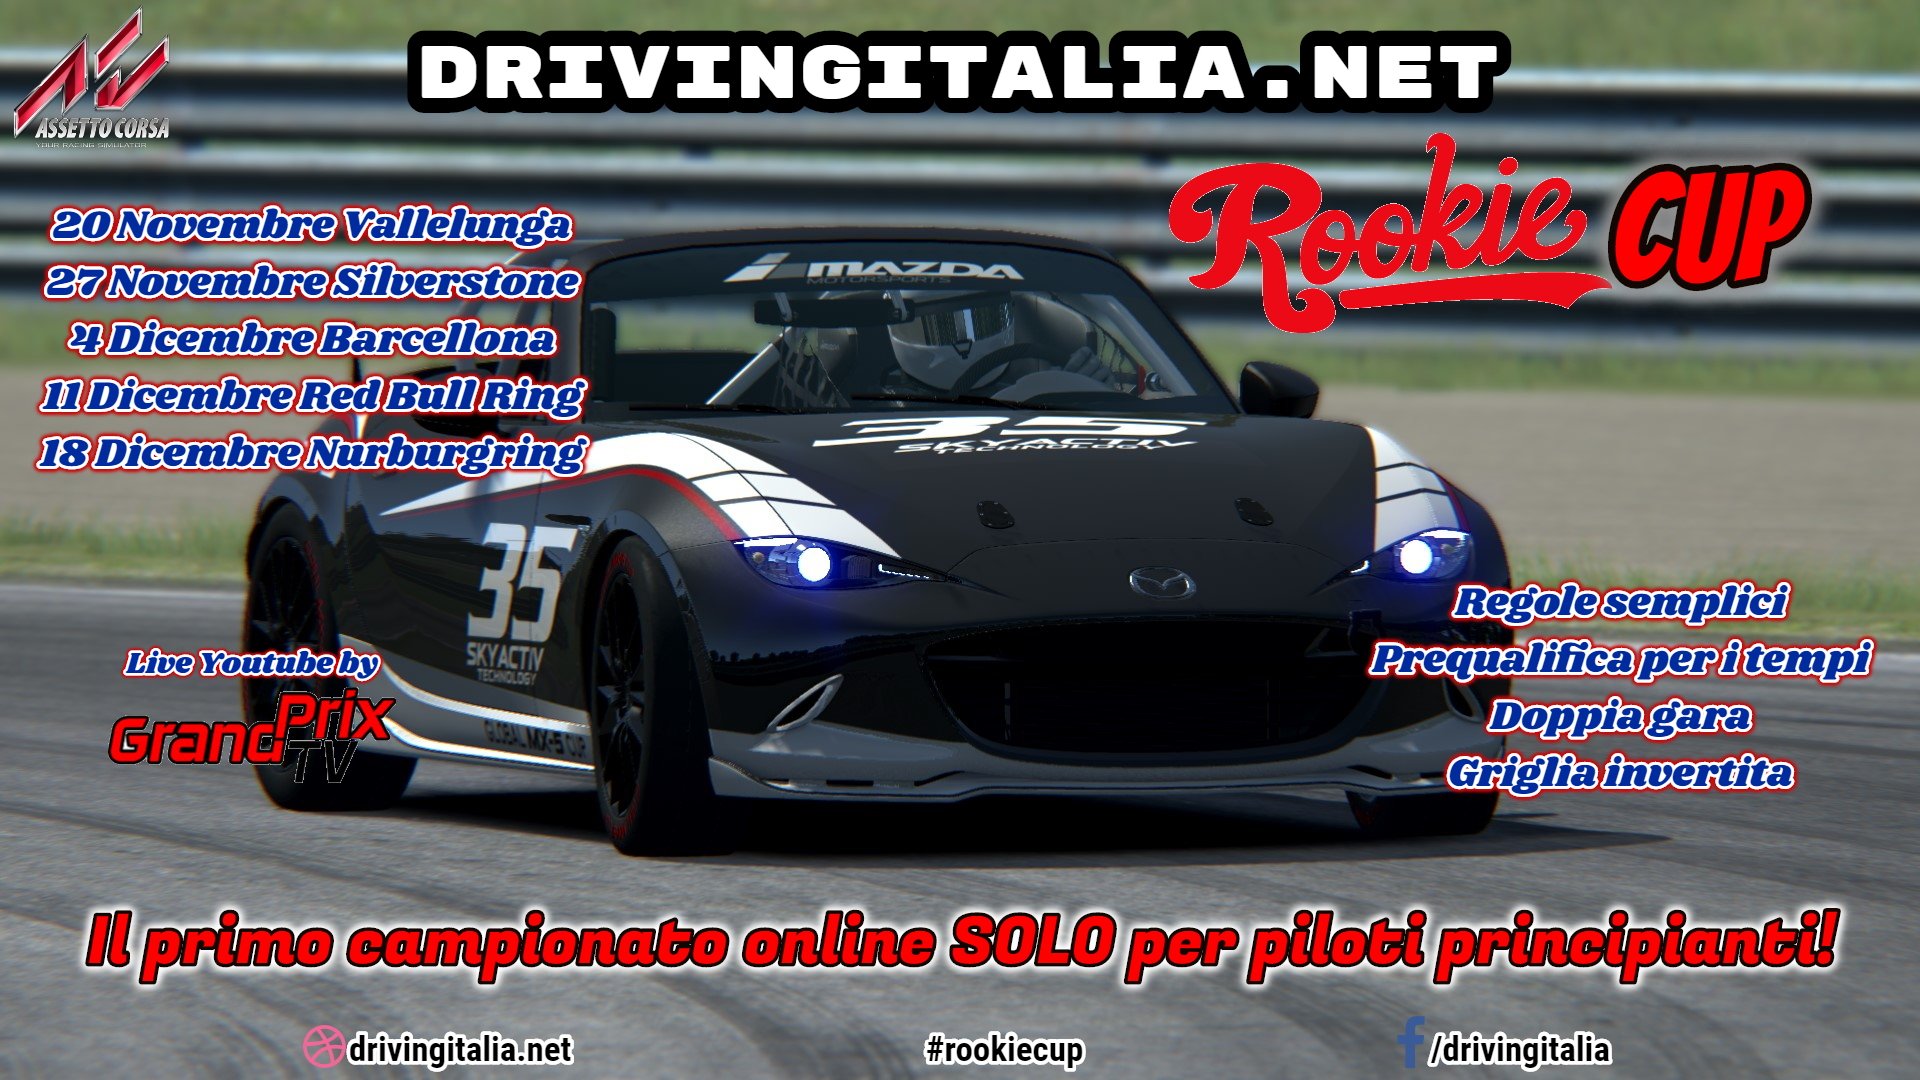 More information about "Rookie Cup: mercoledi 18 il round 5 dal Nurburgring in diretta"